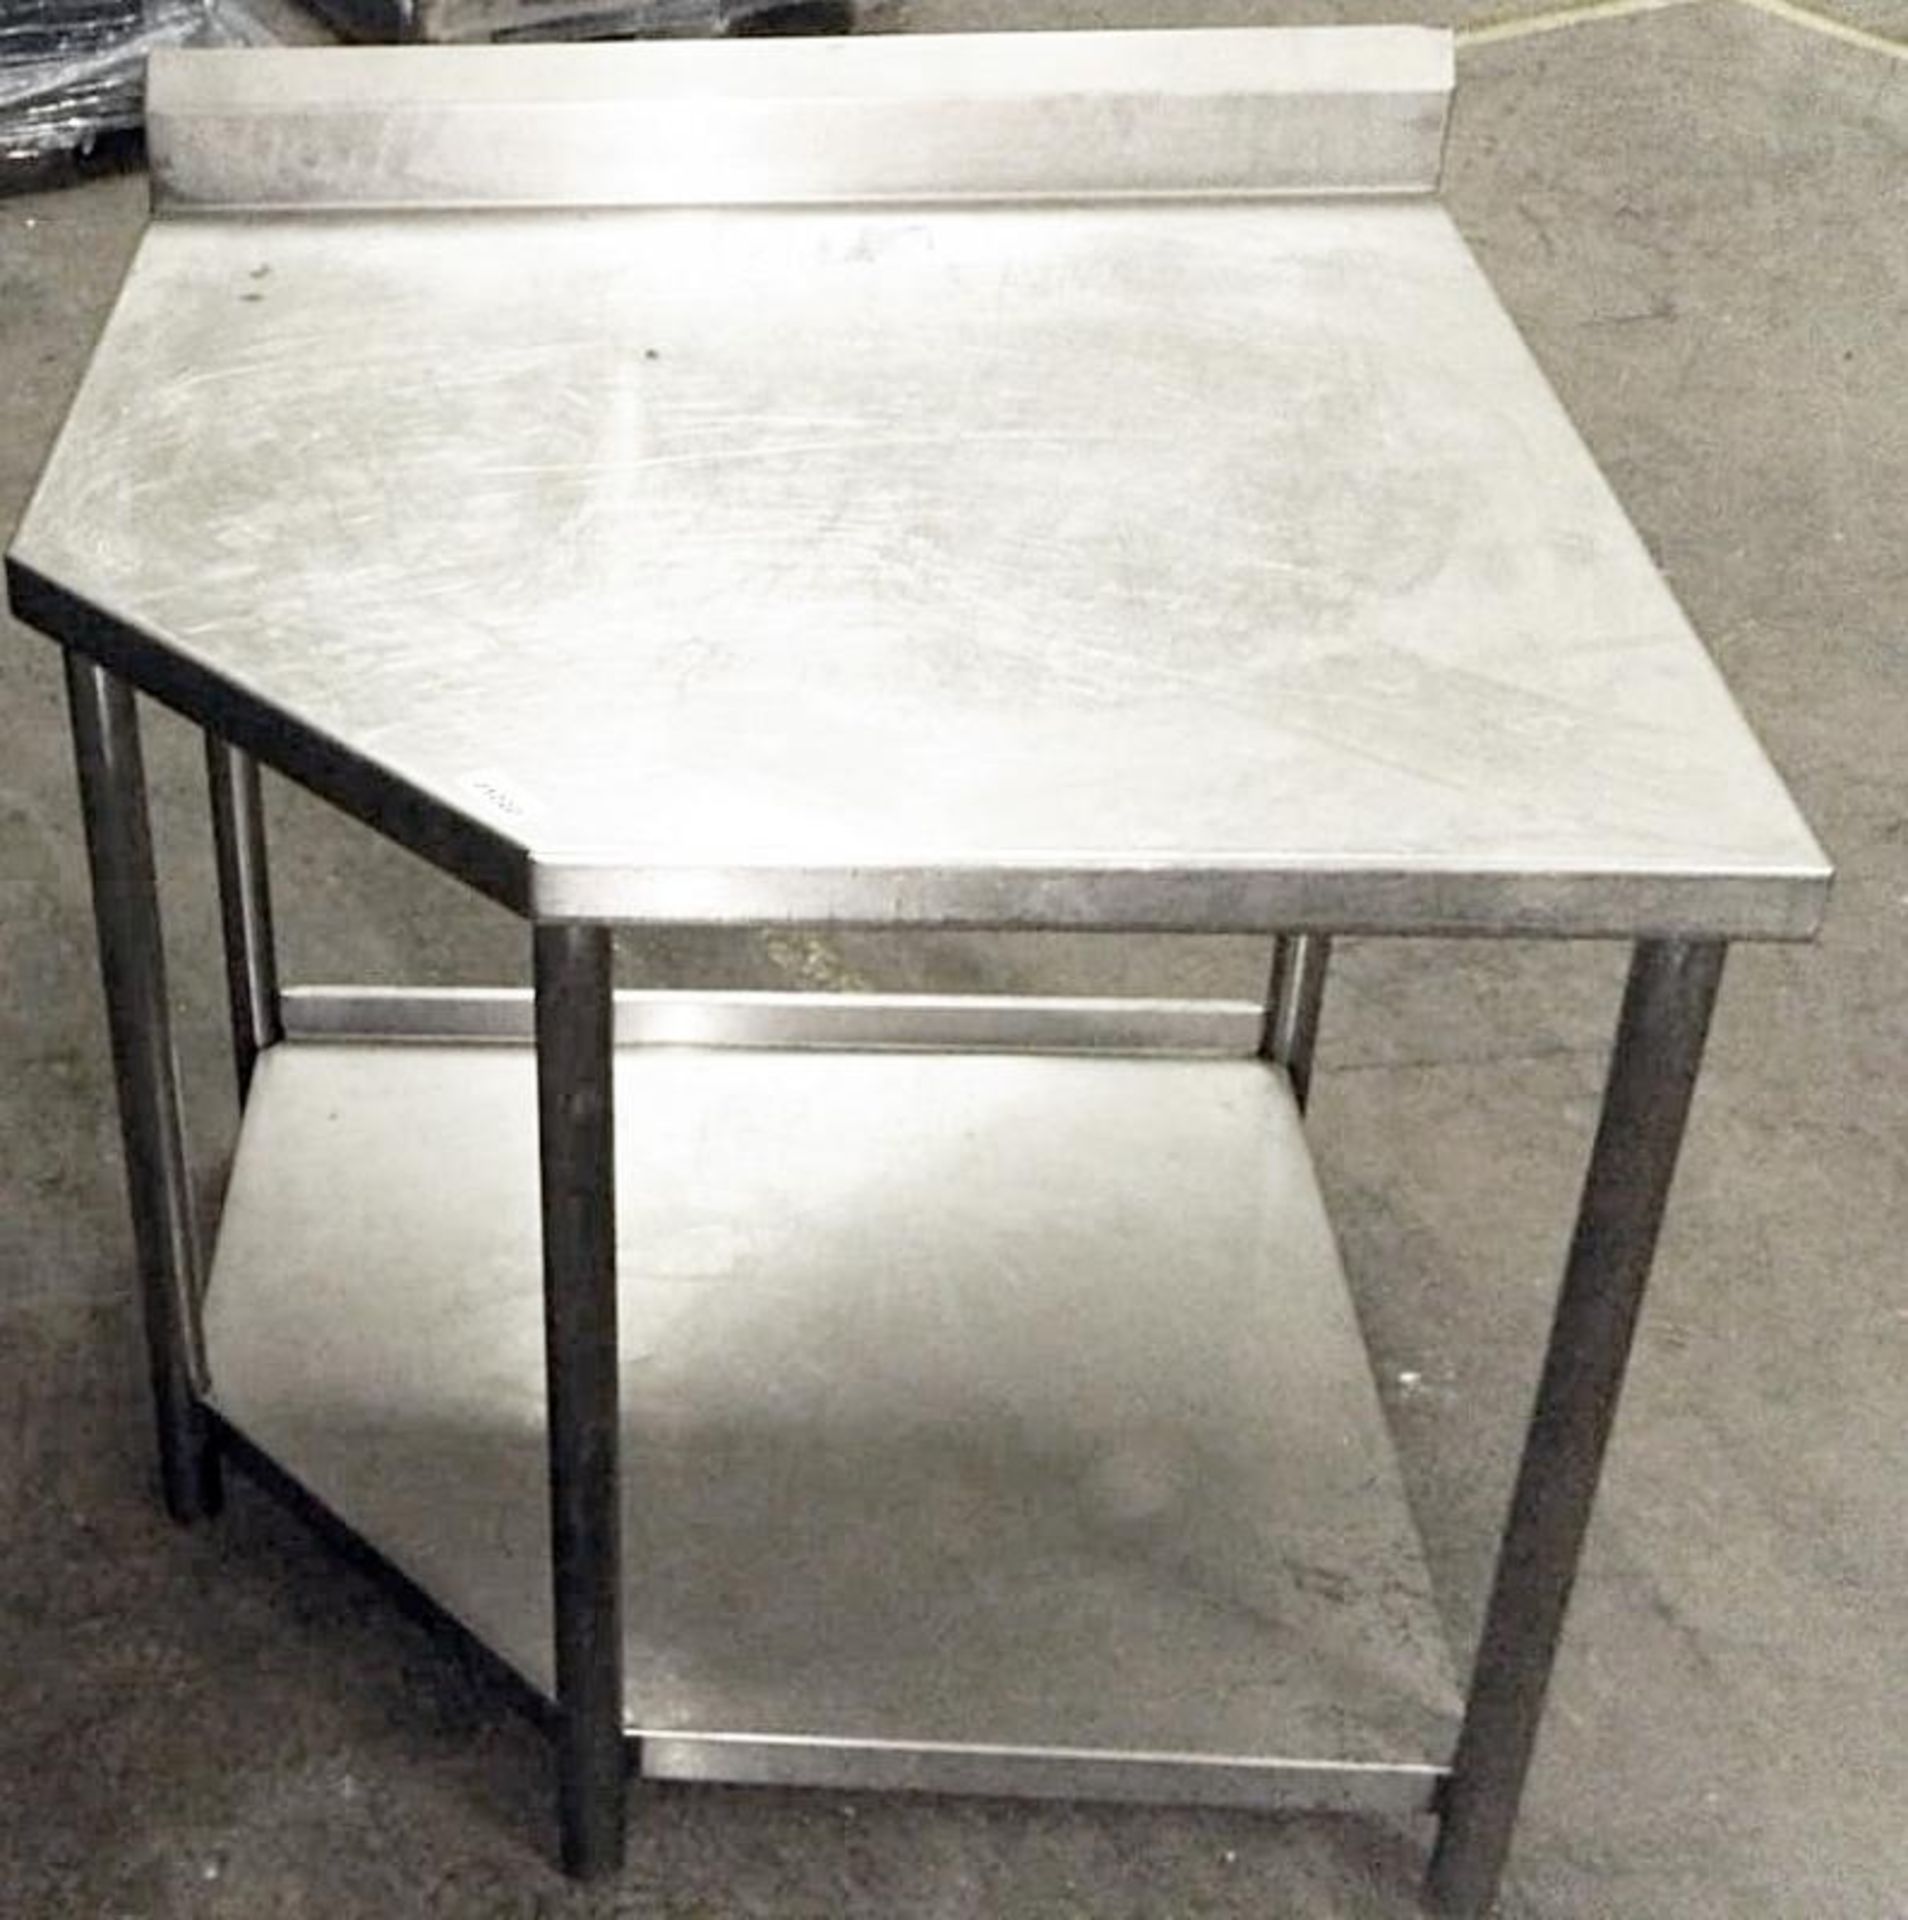 1 x Commercial Stainless Steel Prep Table With Upstand - Dimensions: 85 x 85 x h73cm - £1 Start